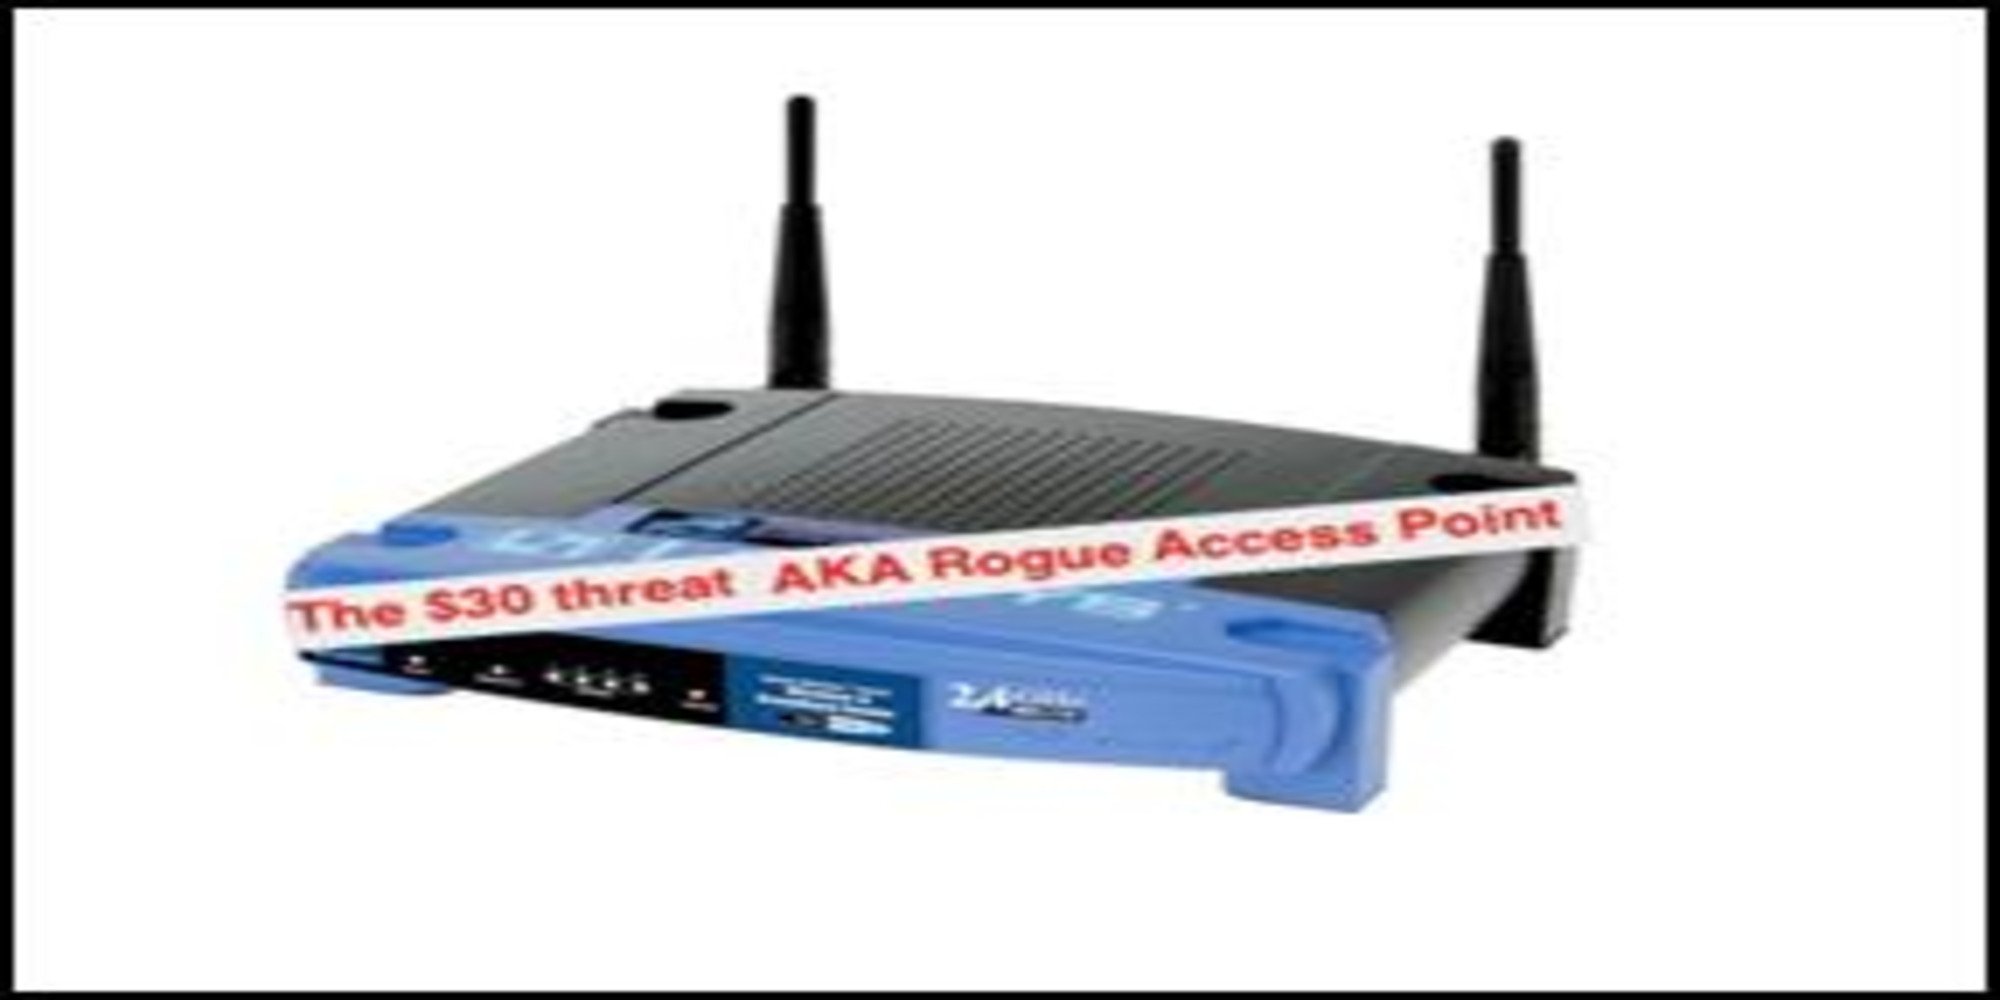 2 Ways School Wireless Networks Are At Risk